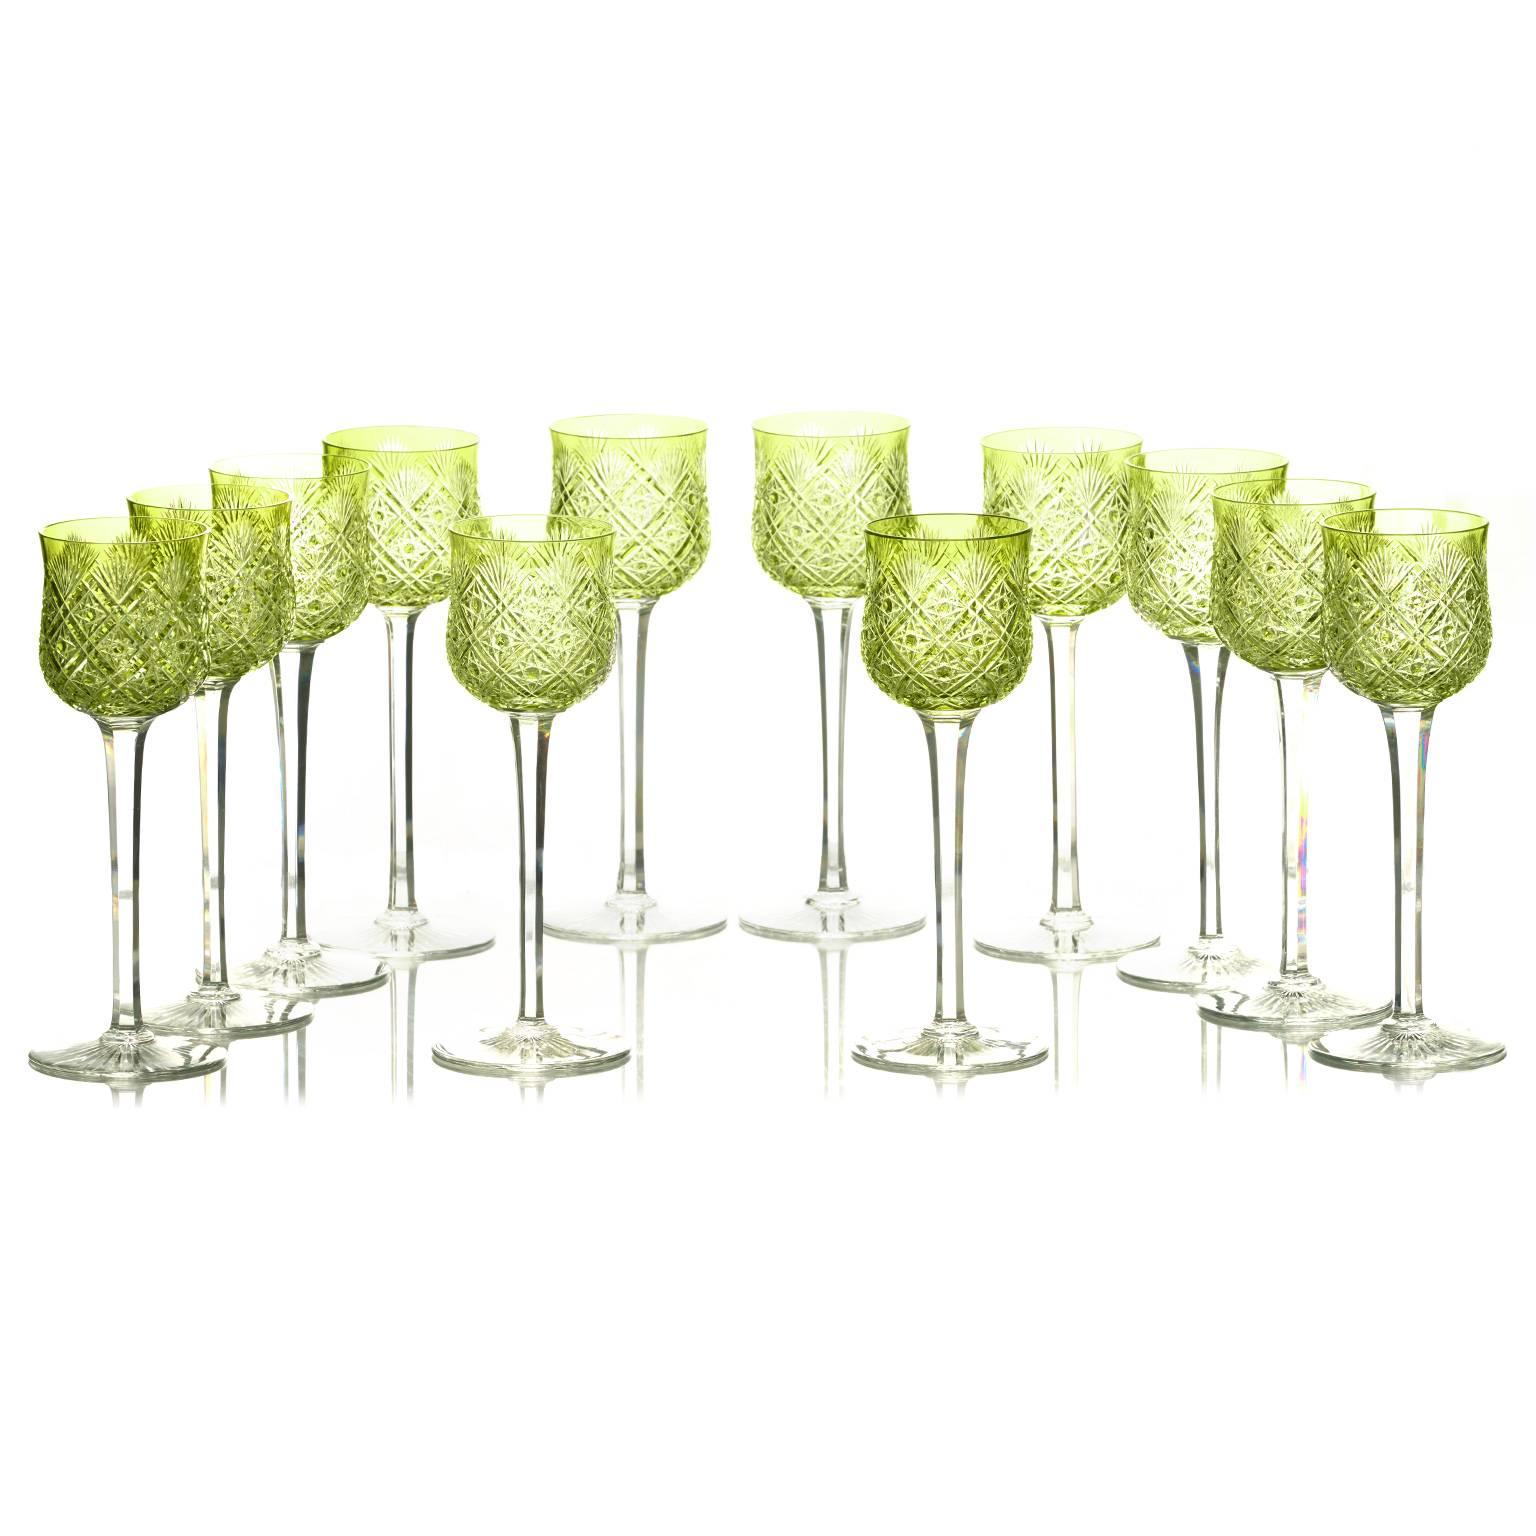 Circa 1910, France. This incredible set of 12 wine goblets by Baccarat in vivid chartreuse cut-to-clear crystal is nothing short of stunning. Colorfully decorating an impeccable table, these glasses are finely made, beautifully designed, and in